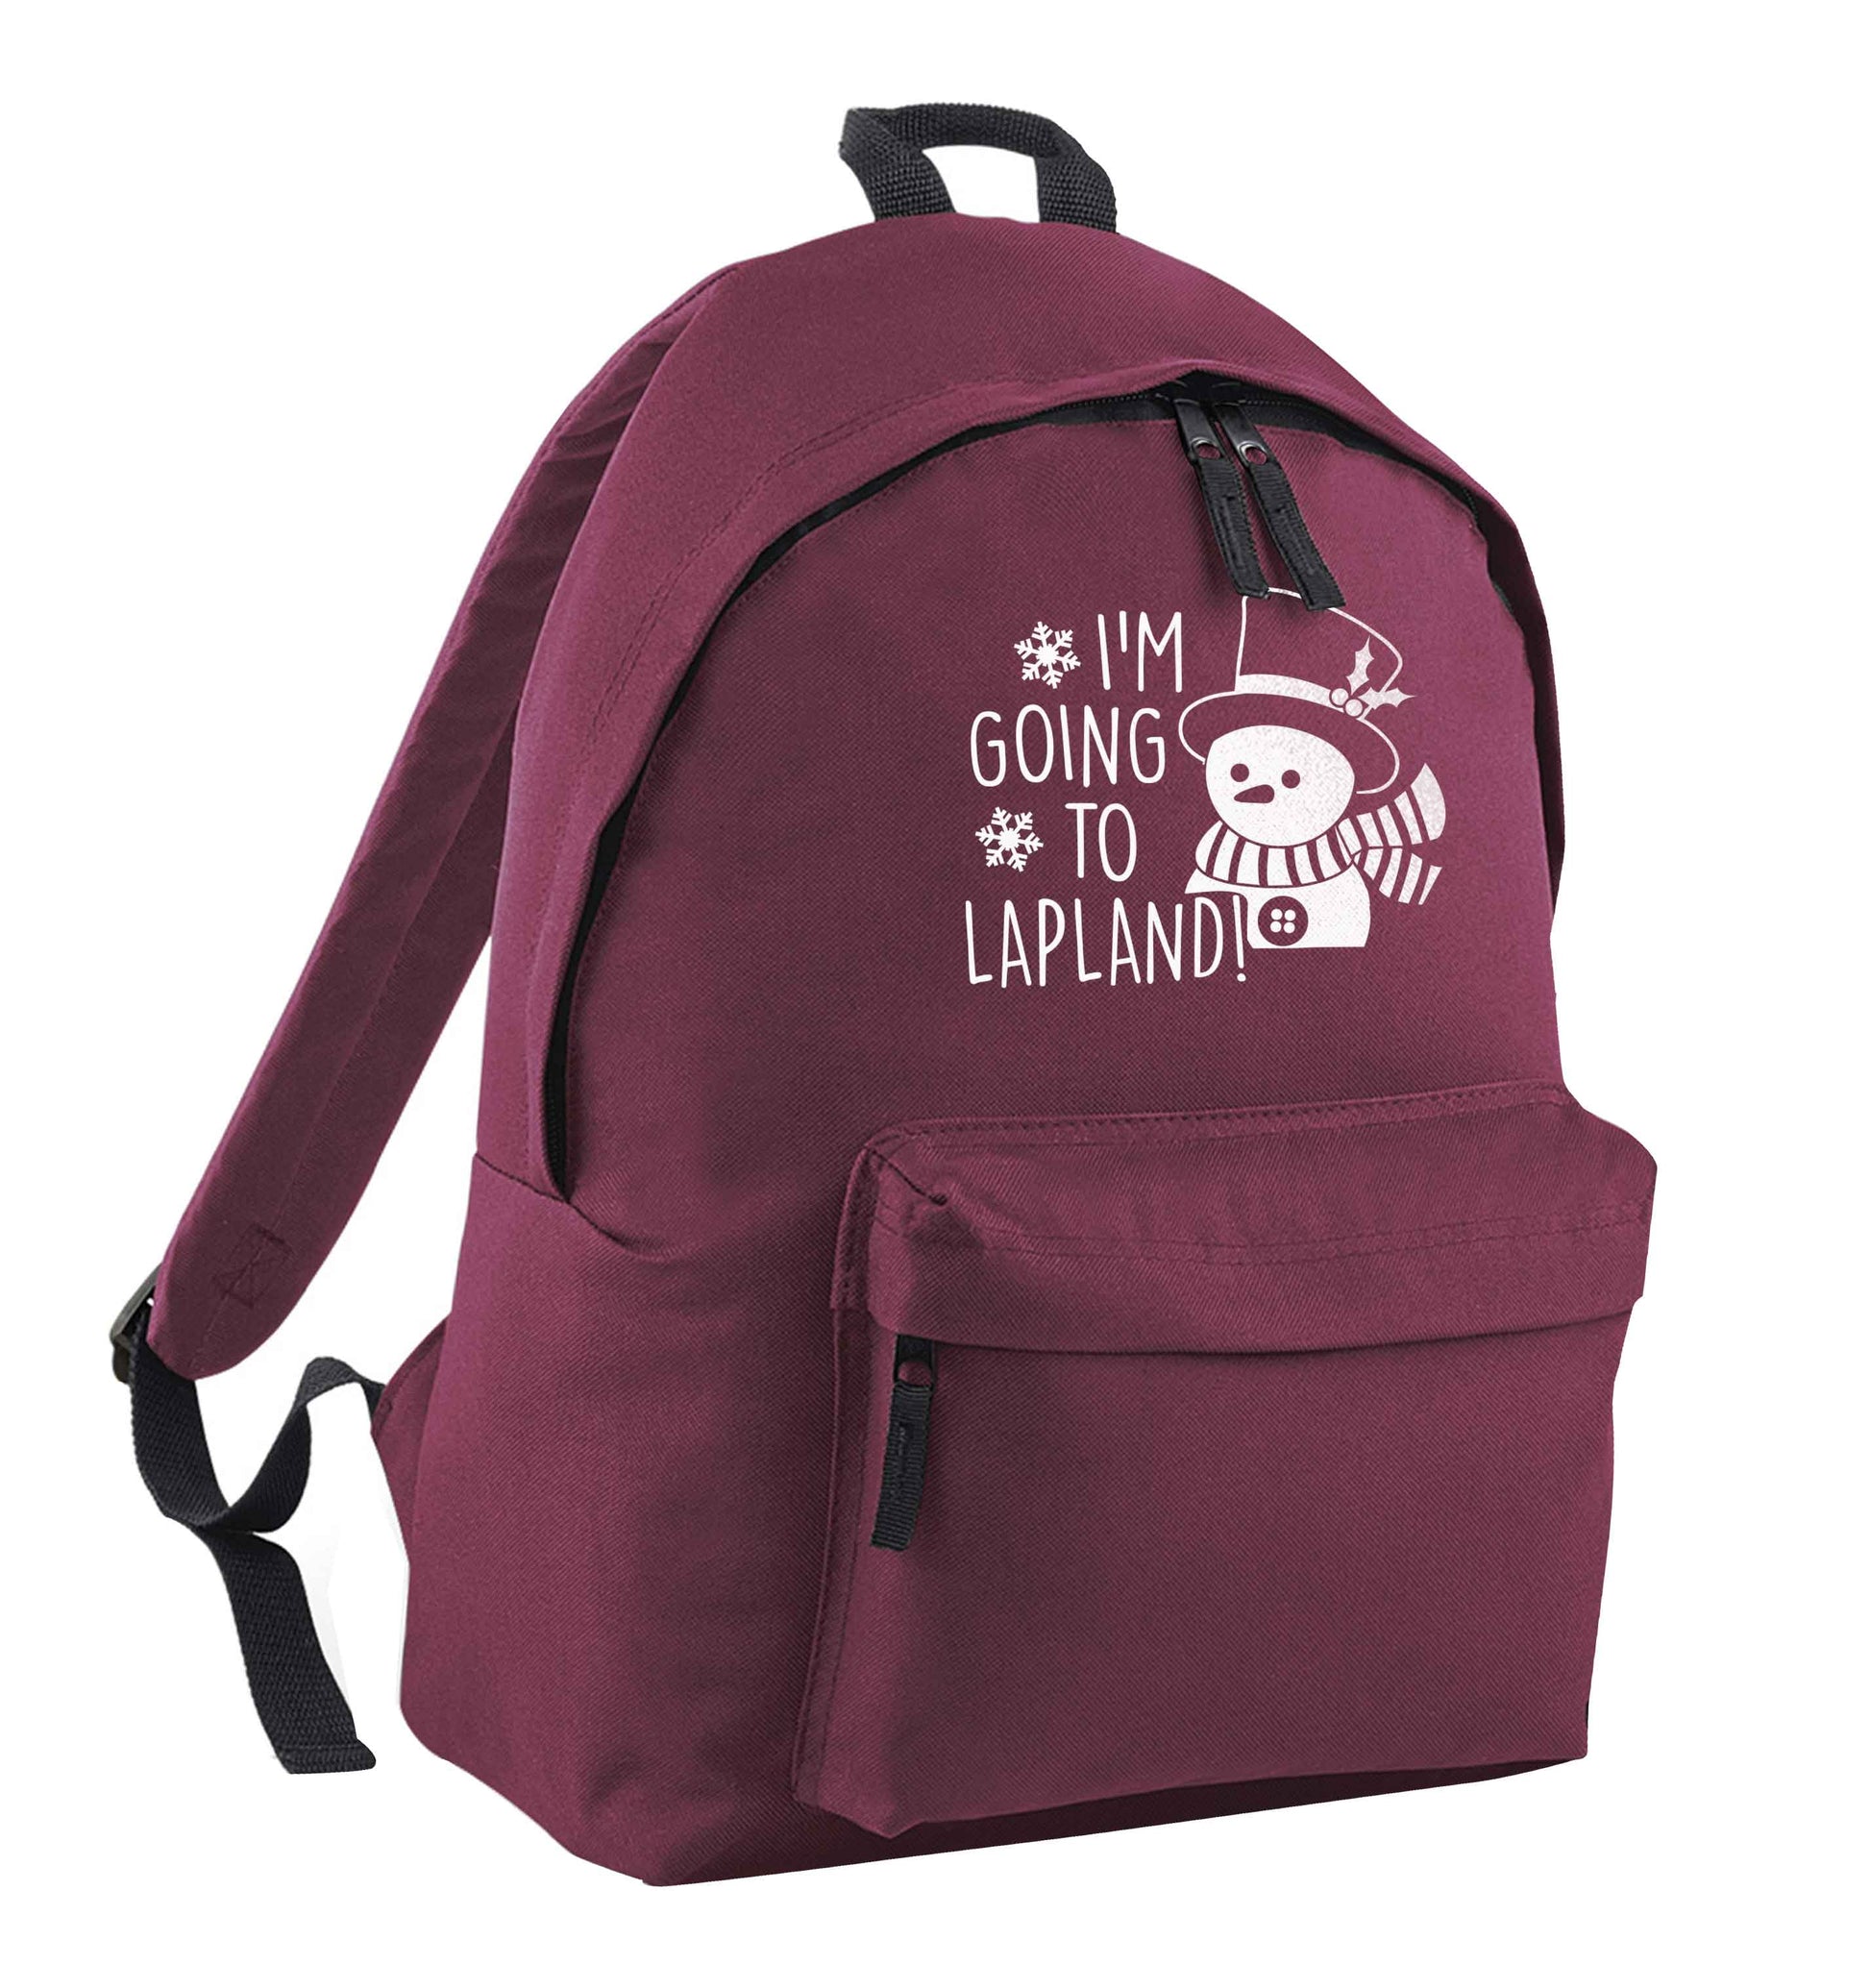 I'm going to Lapland maroon children's backpack